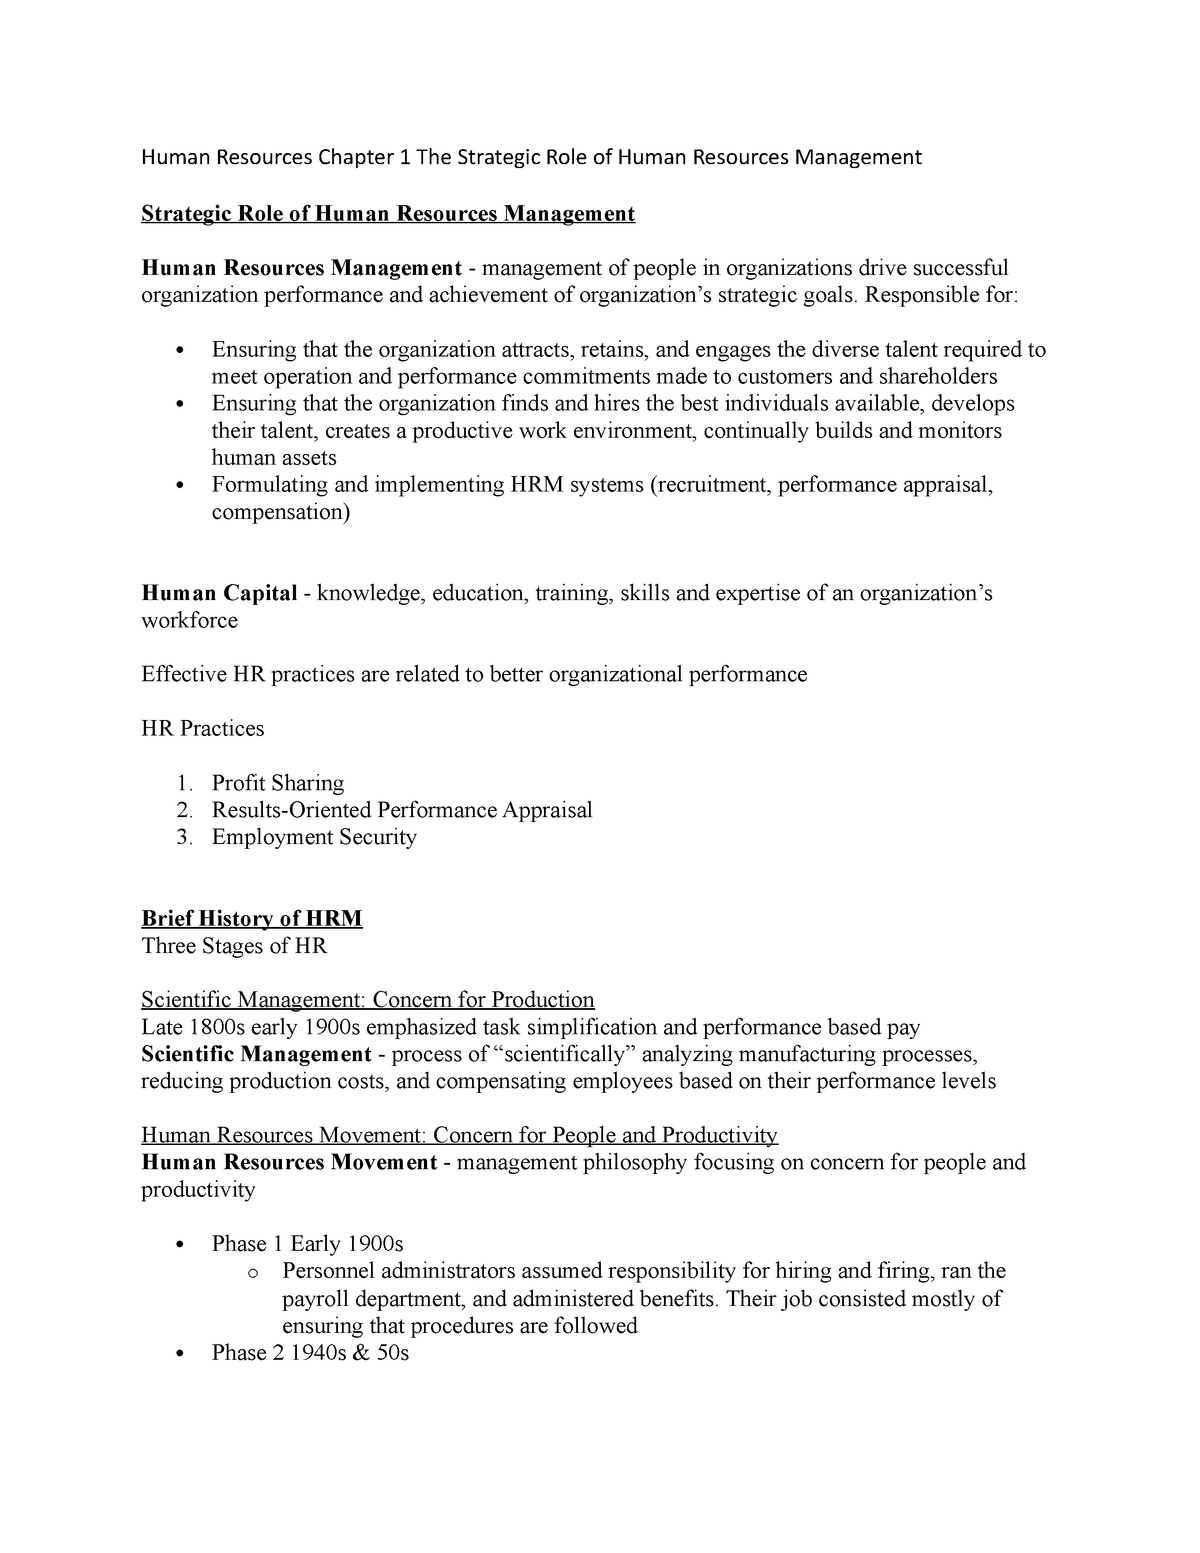 Human Resources Chapter 1-9 Notes - Human Resources Chapter 1 The ...